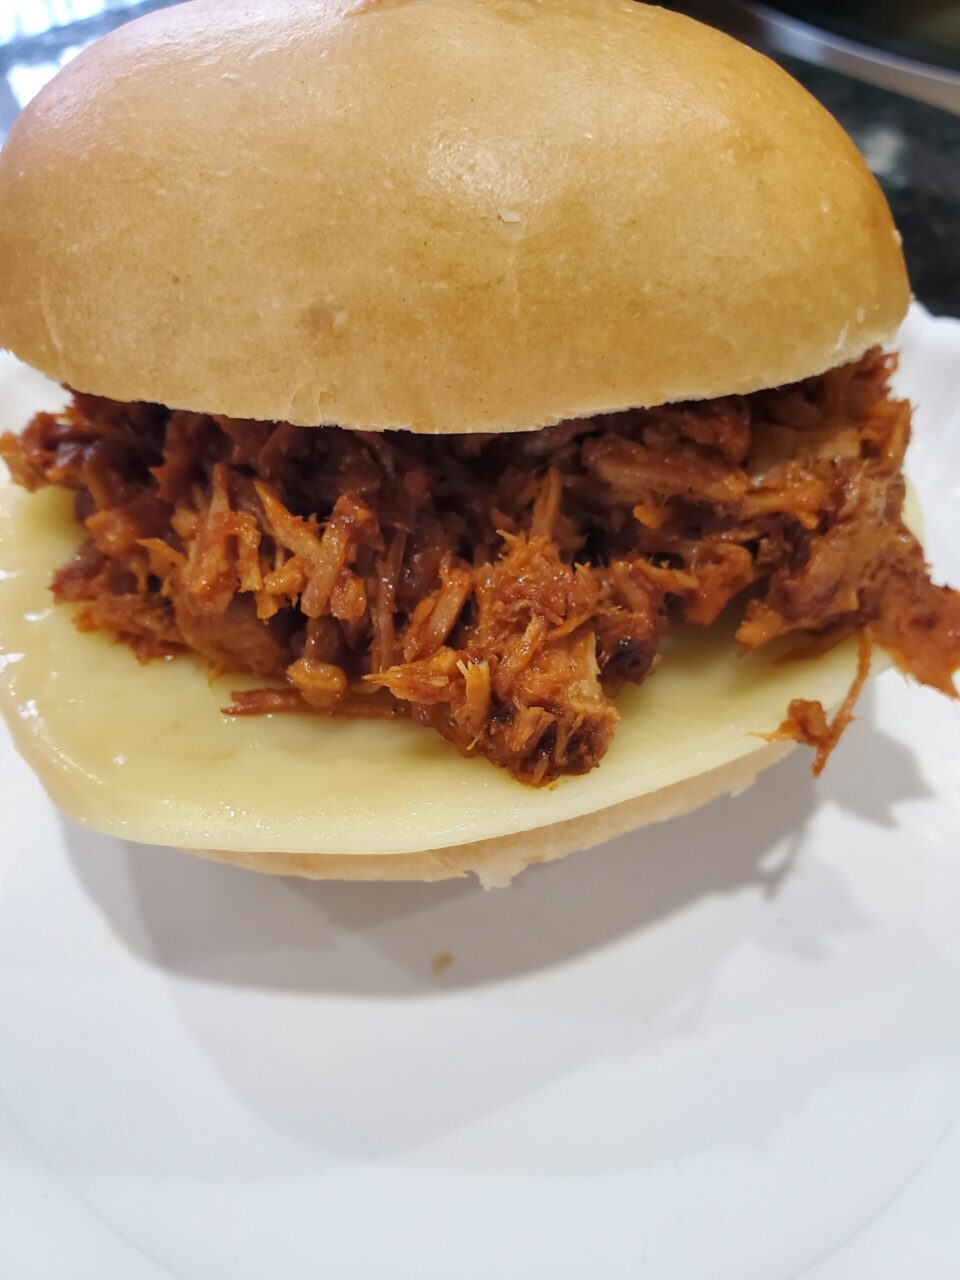 Delicious pulled pork on a fresh bun with provolone cheese